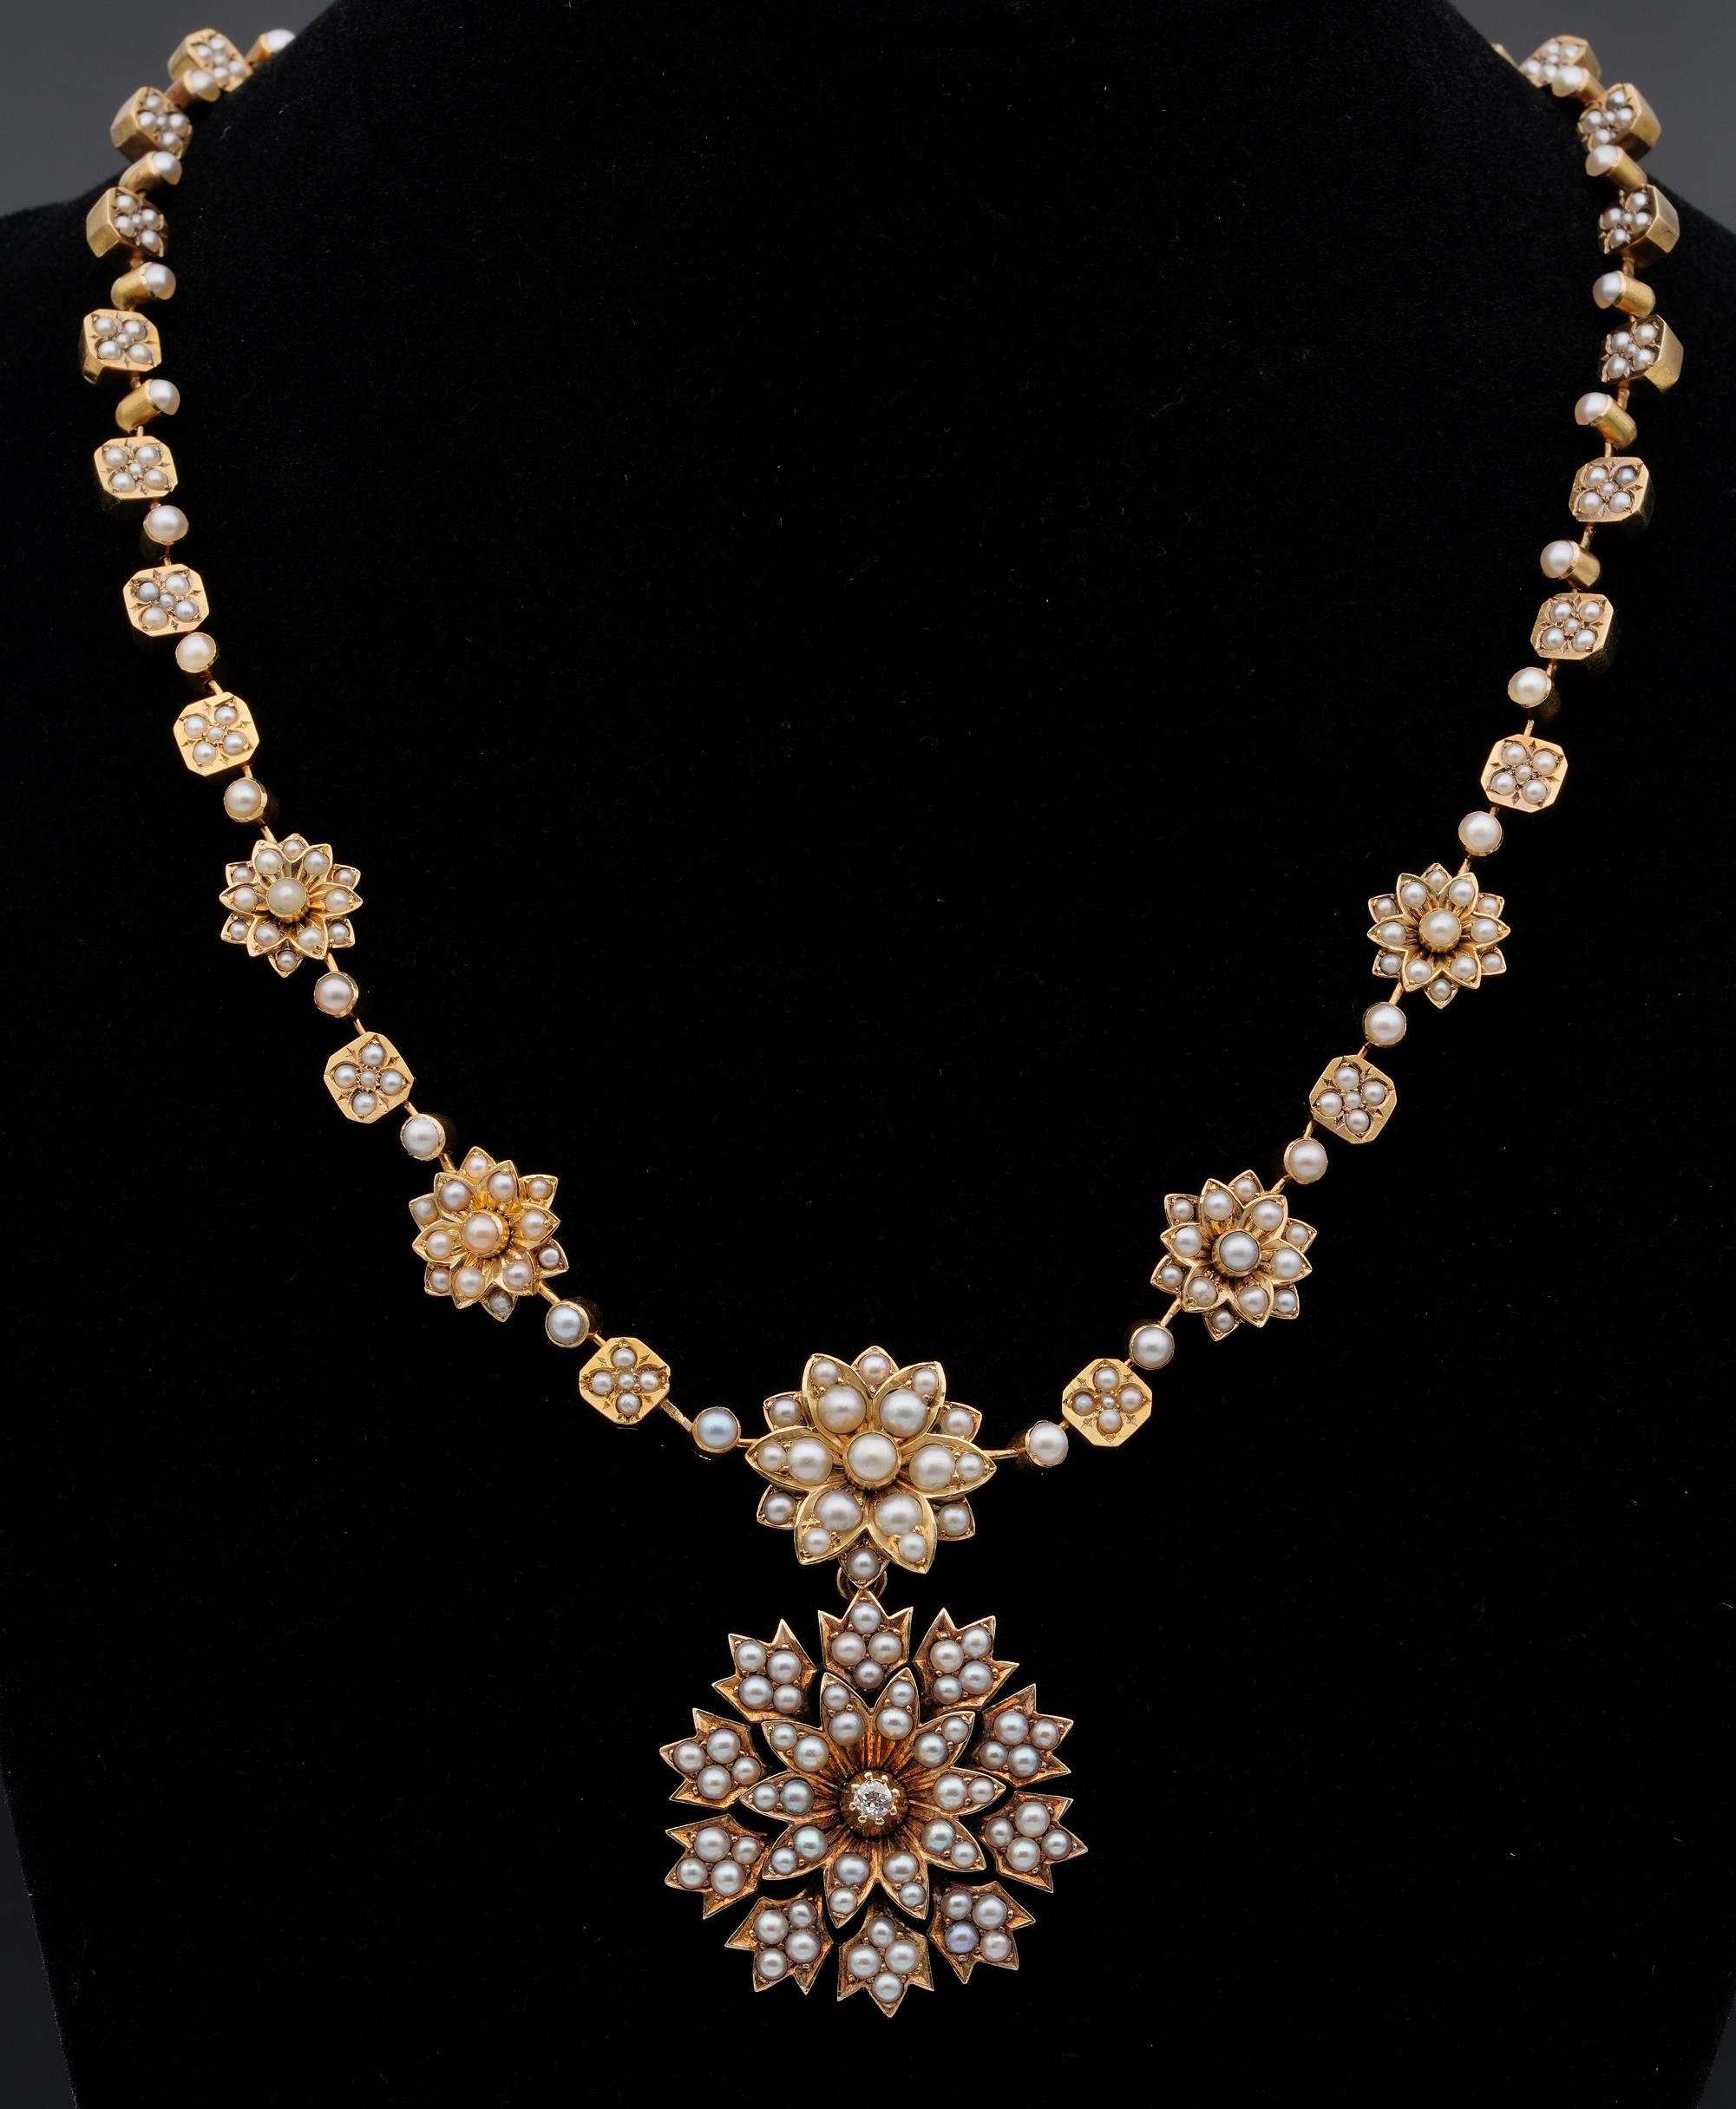 An antique pearl and diamond demi parure, 19th century in yellow gold, comprising a necklace and brooch, the necklace formed of a single row of square and floral links set with pearls, the brooch designed as a flower, set at the centre with an old